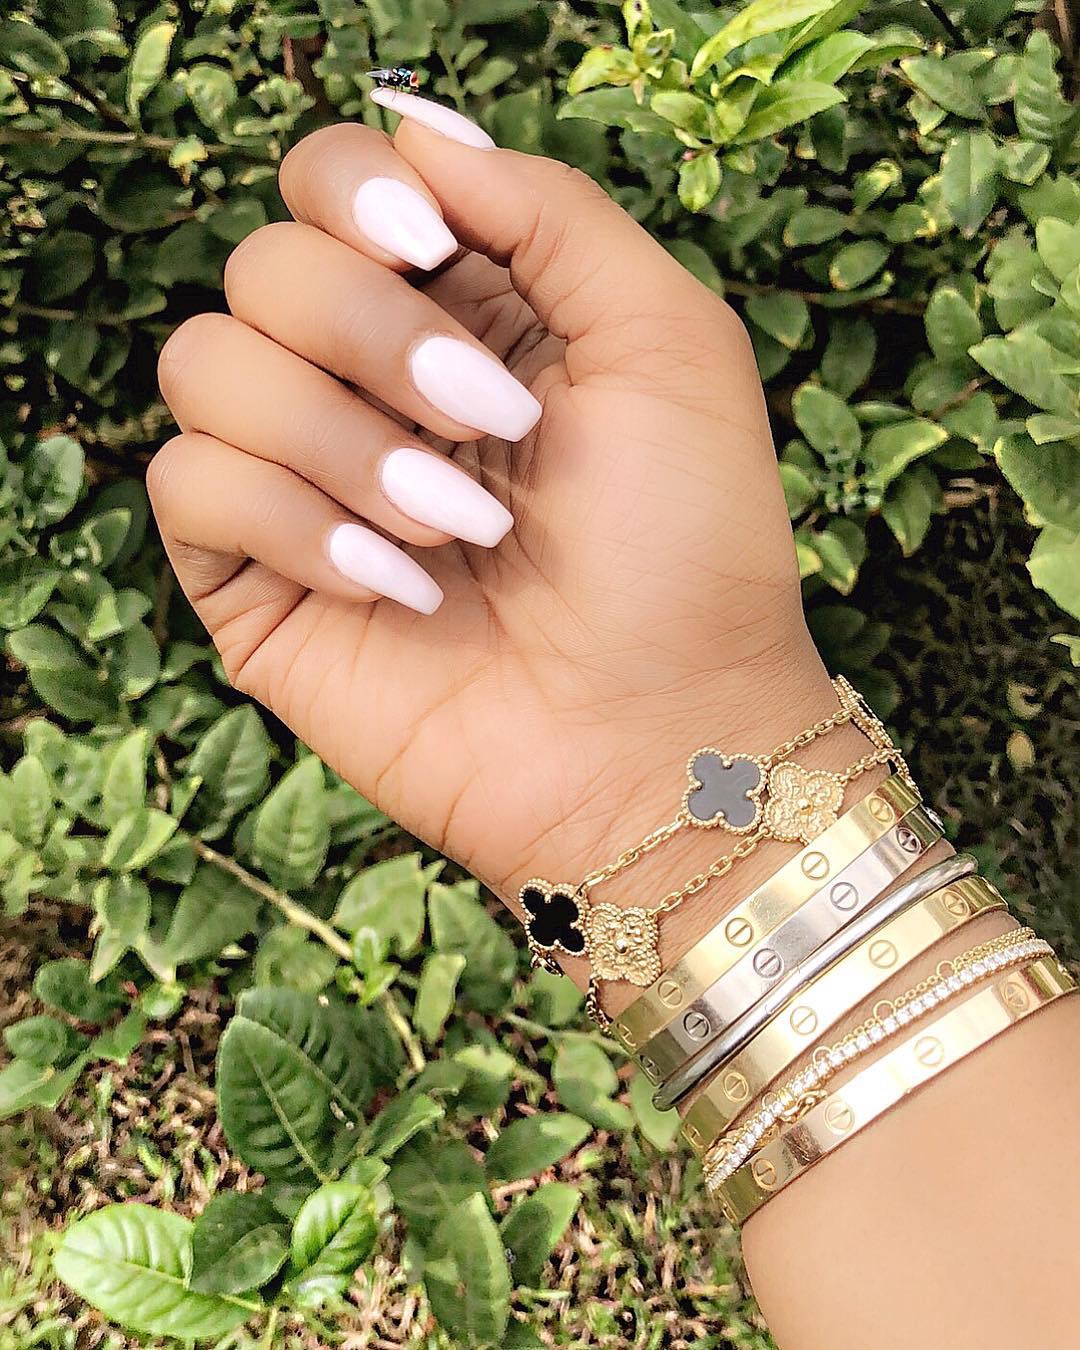 kika-good-nails-9-times-the-good-hair-boss-served-manicure-goals